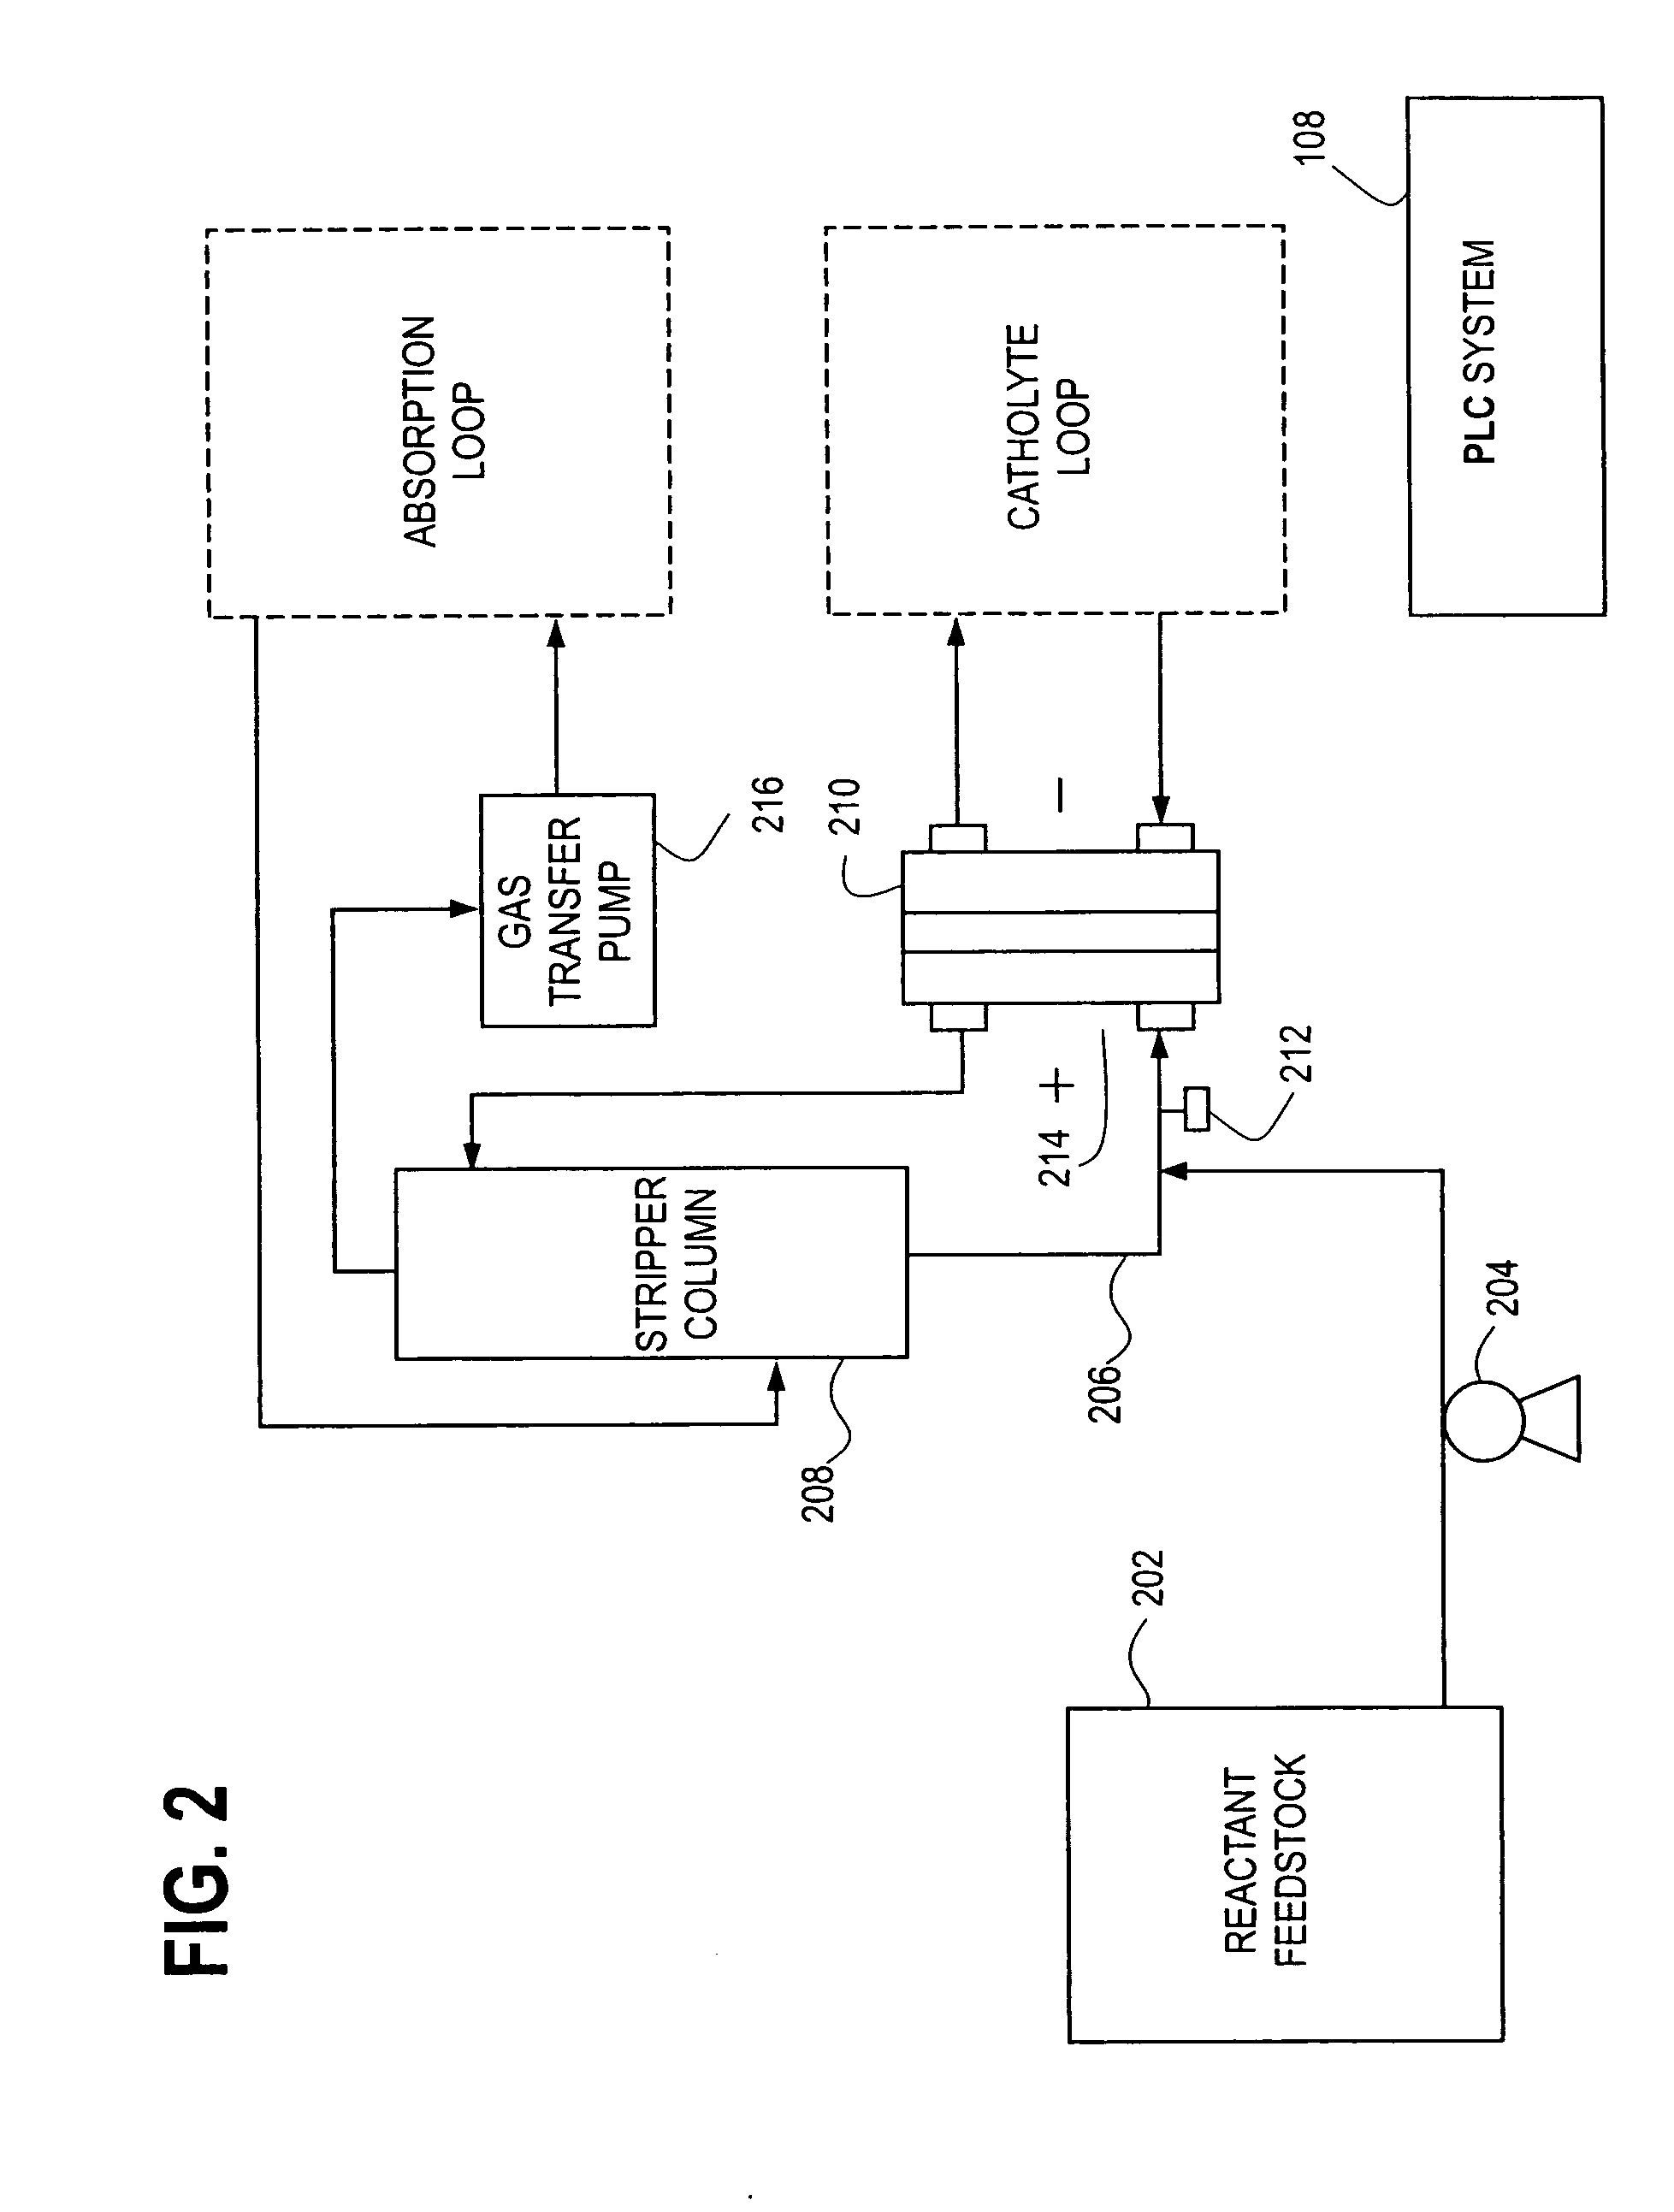 Chlorine dioxide solution generator with temperature control capability